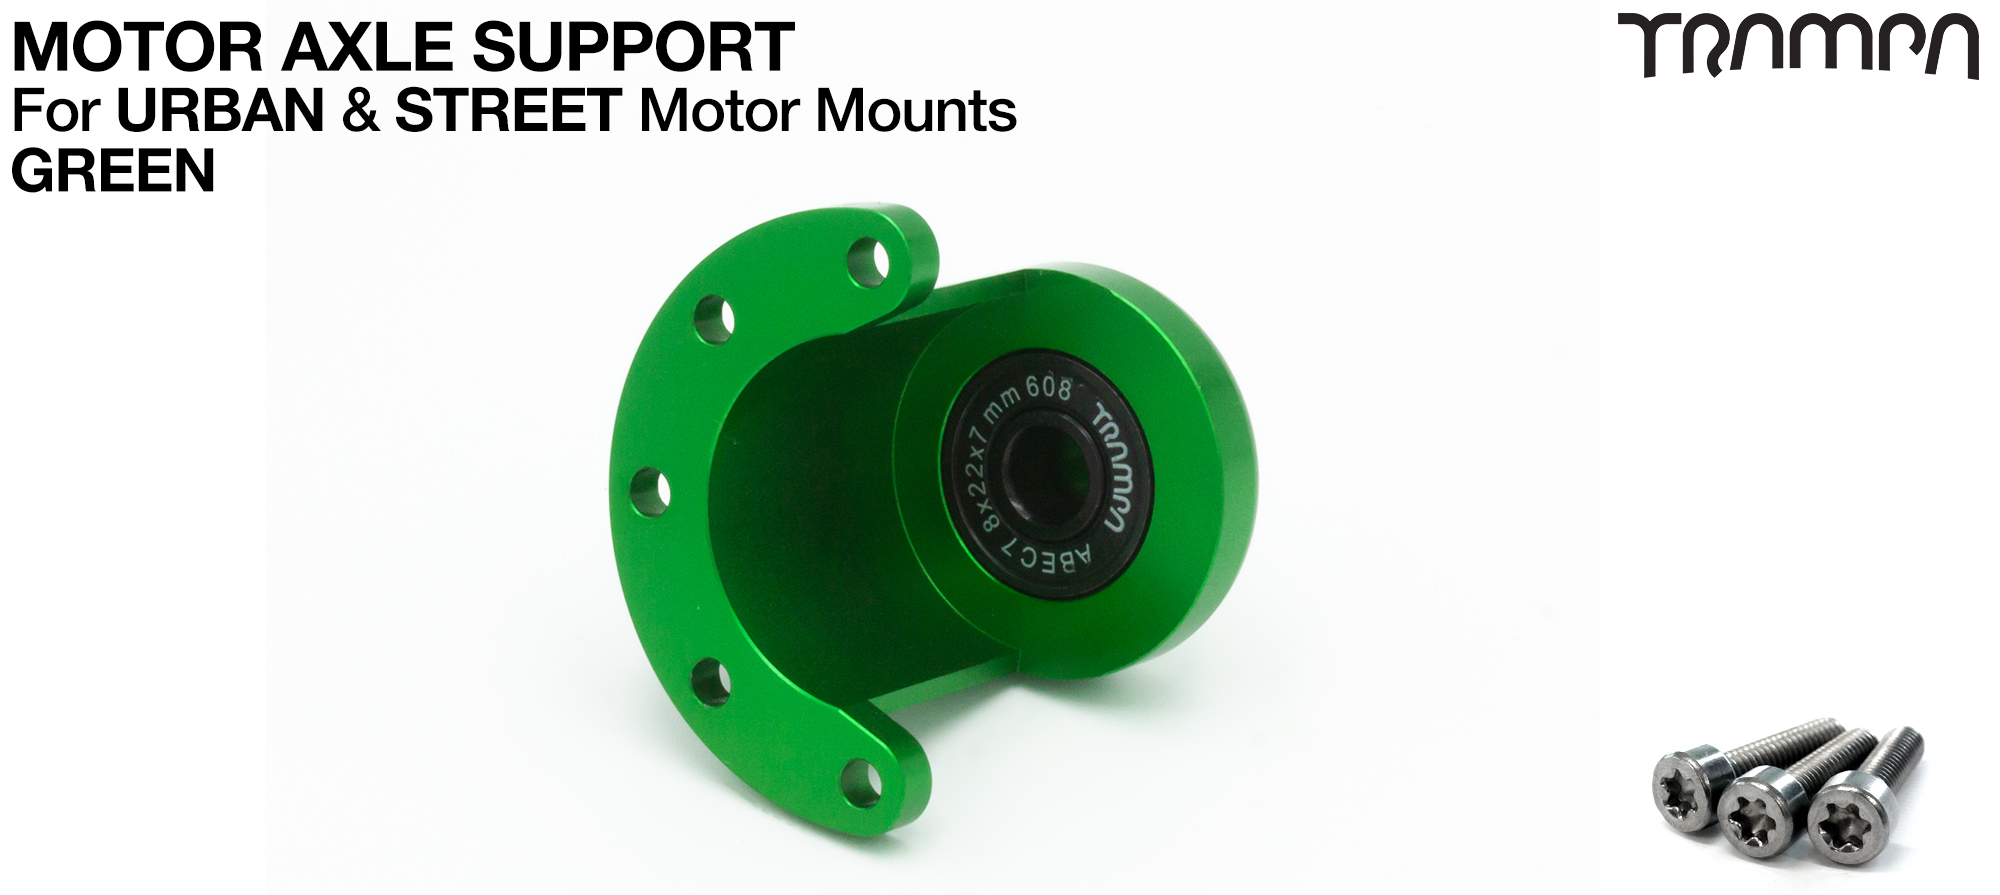 Motor Axle Support Housing with TRAMPA R608 8x22x7mm Bearing, C-Clip & Stainless Steel fixing Bolts for ORRSOM Longboard Motor Mounts  - GREEN